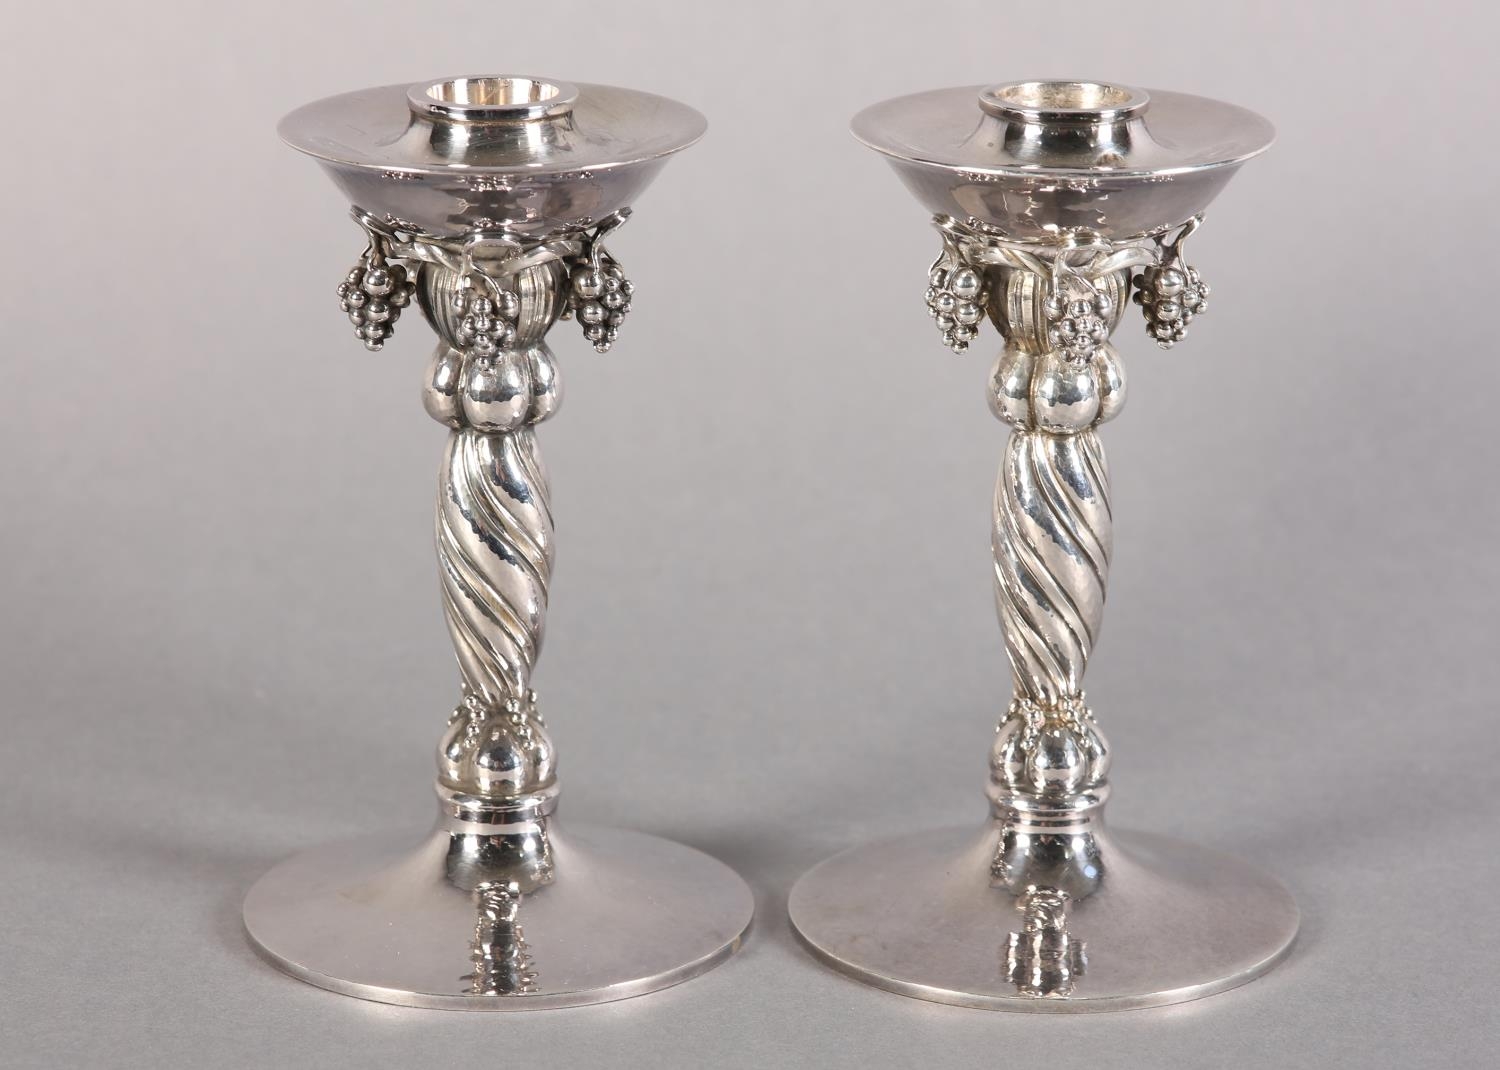 A PAIR OF GEORG JENSEN SILVER GRAPEVINE CANDLESTICKS No. 263A both signed Y10 9255 Denmark Georg